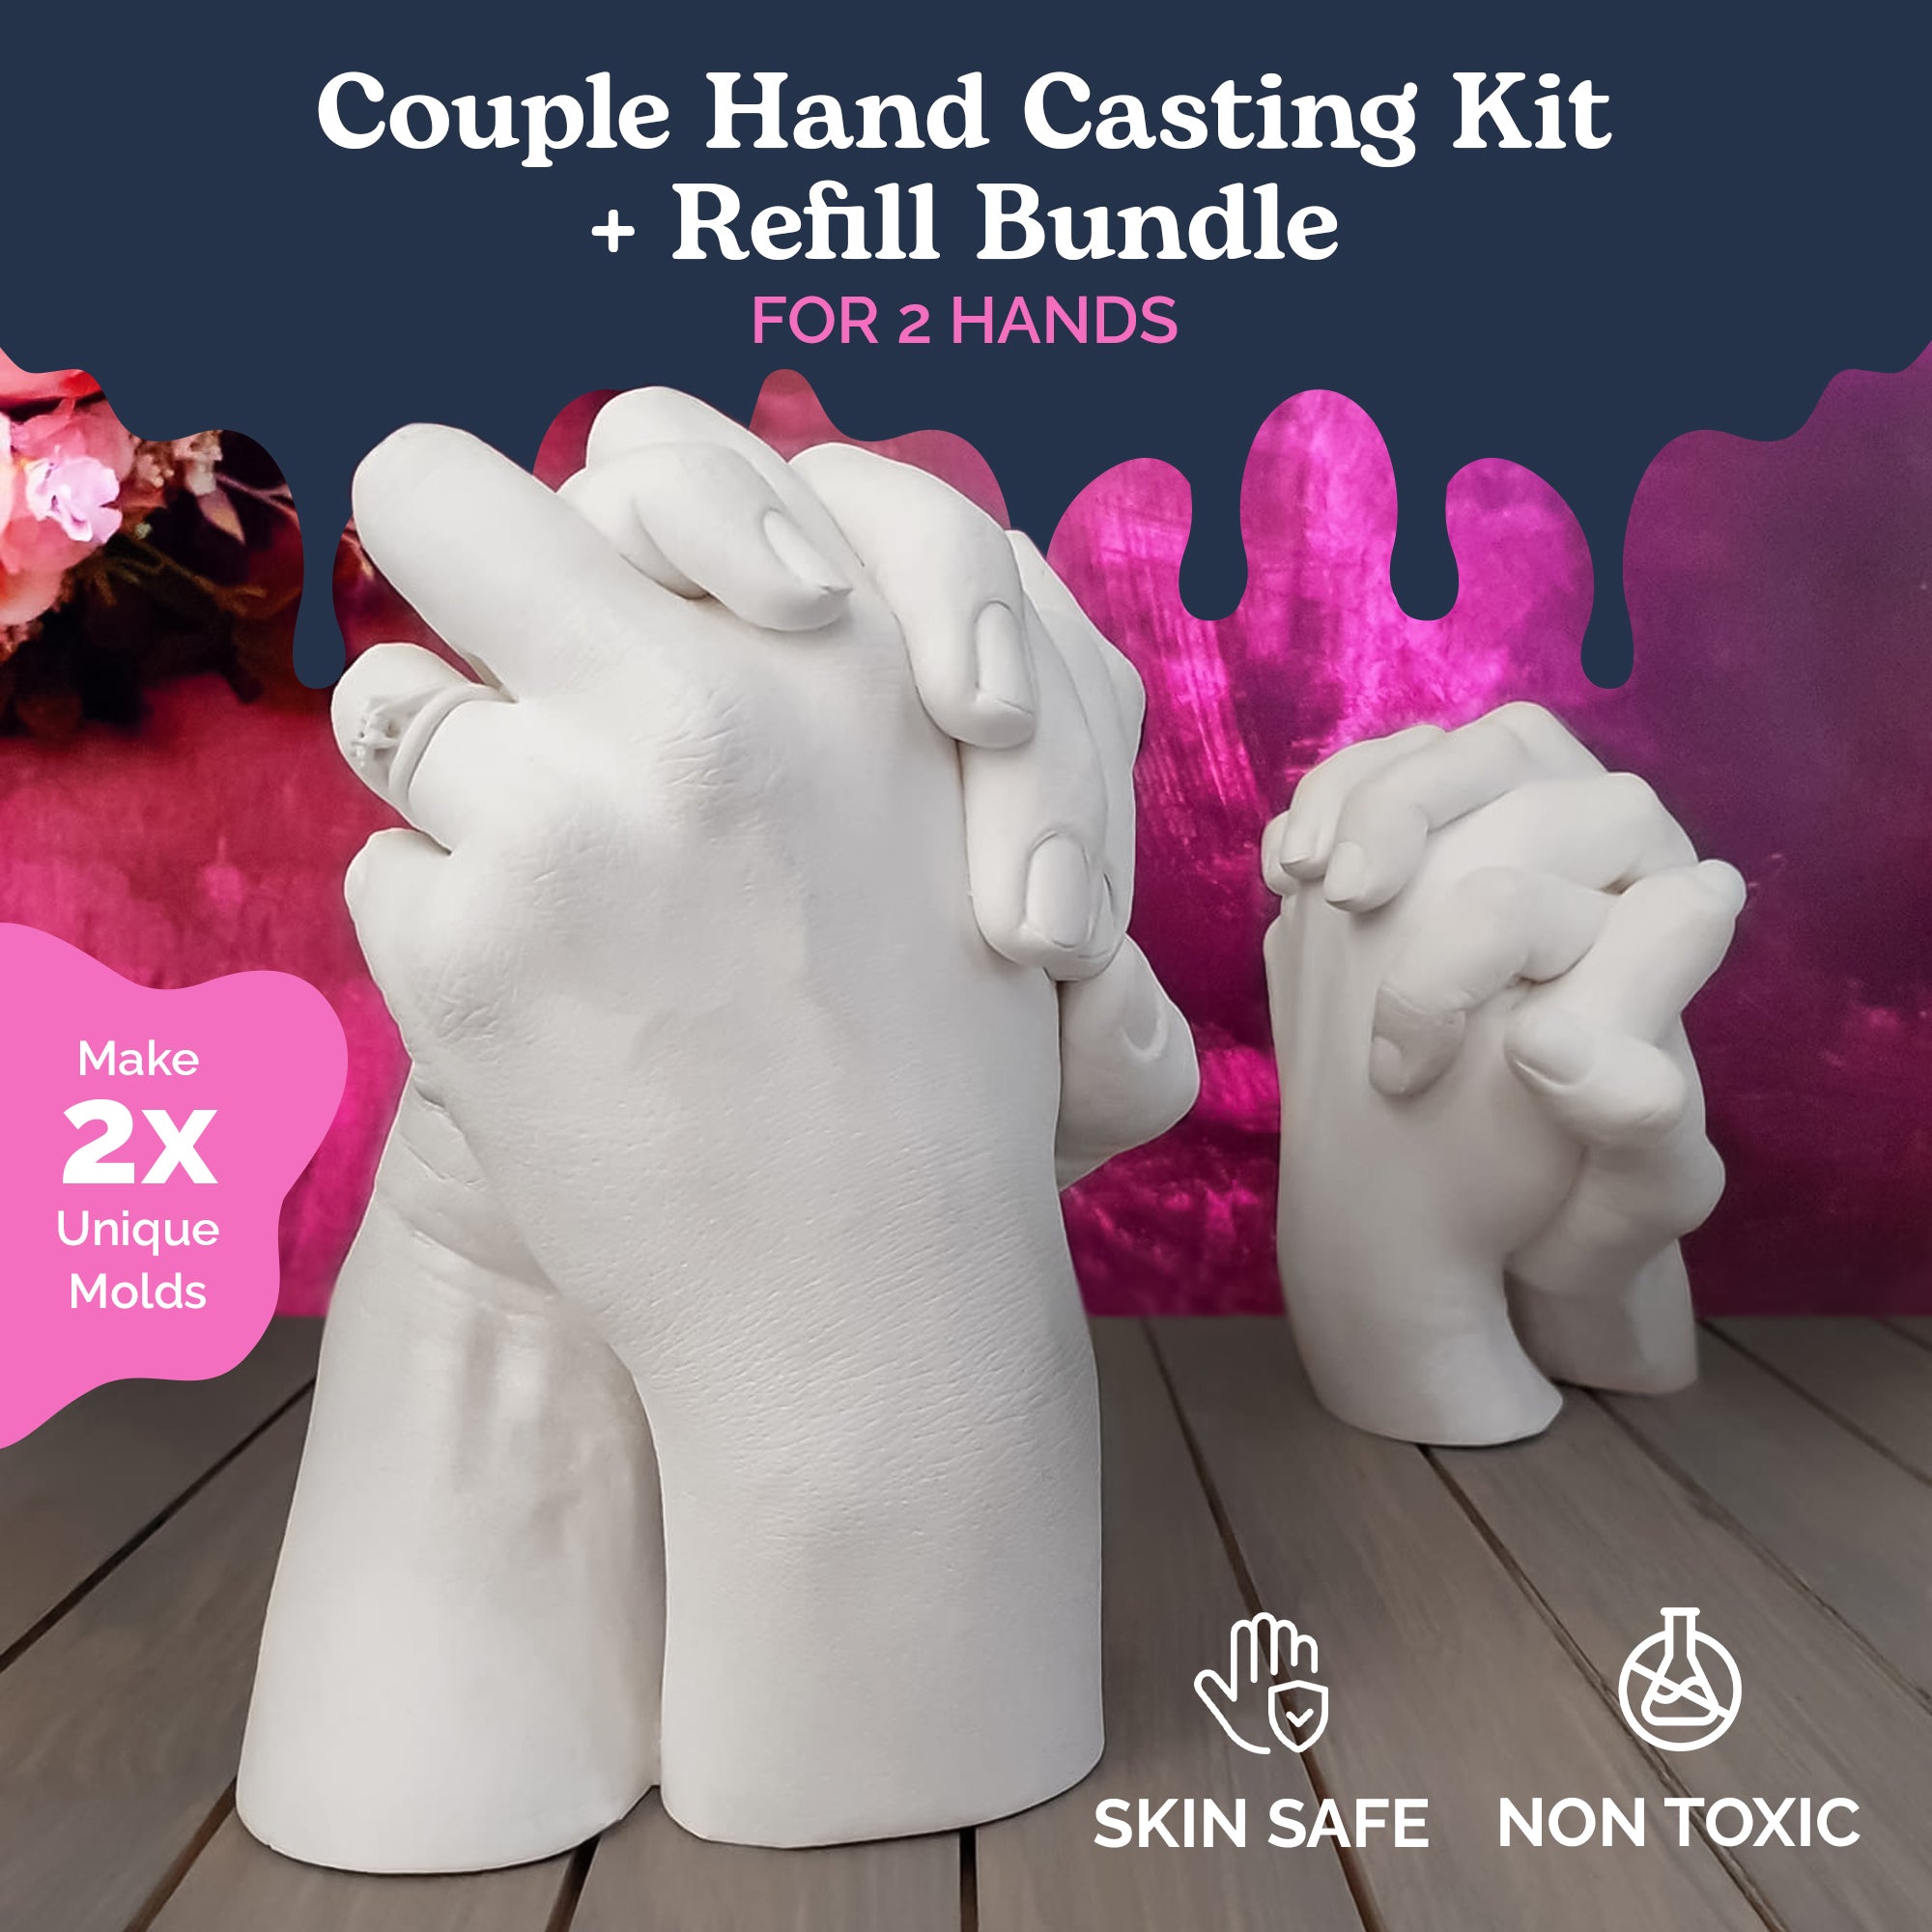 Top 5 Most Common Problems with Hand Casting Kits